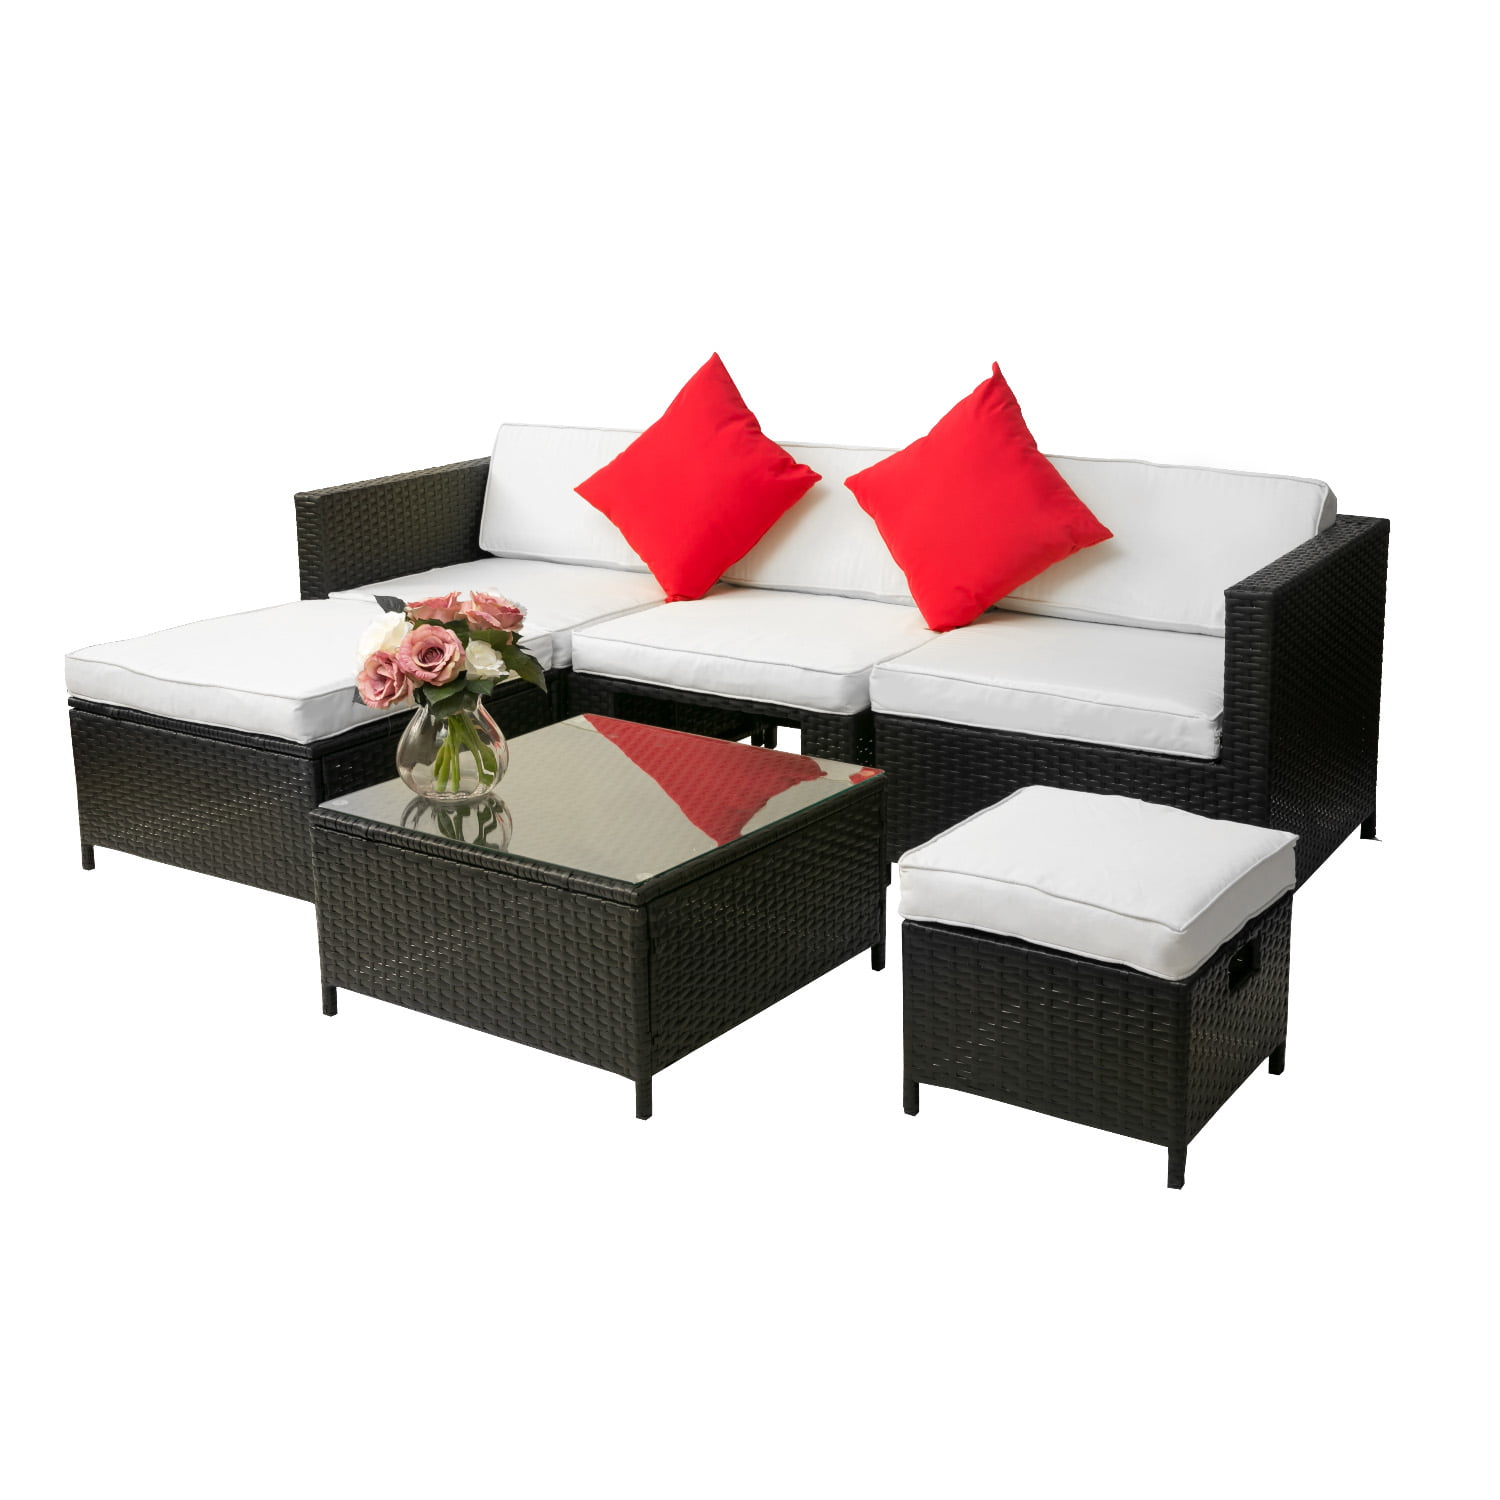 Clearance! Outdoor Furniture, 6-Piece Patio Furniture Sets ...